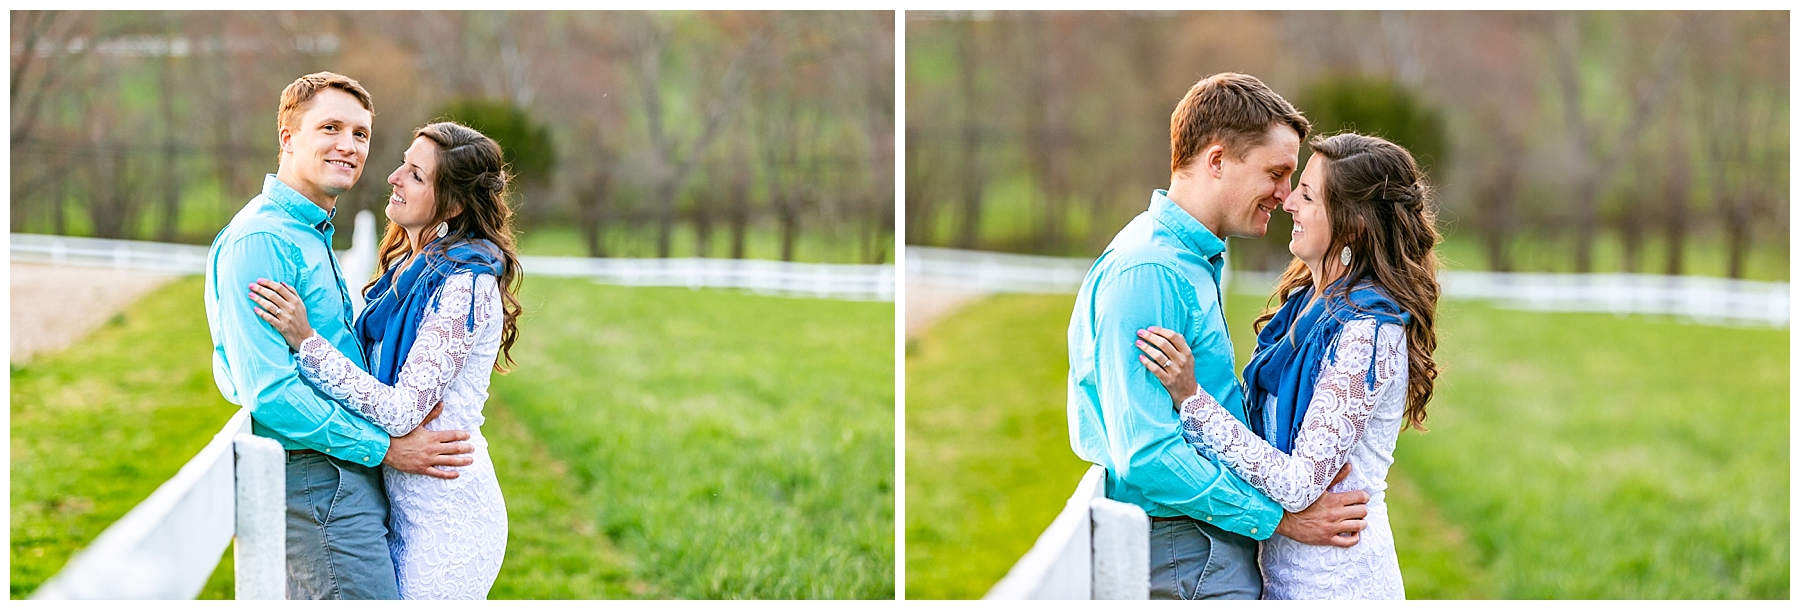 Chelsea Phil Private Estate Engagement Living Radiant Photography photos color_0049.jpg